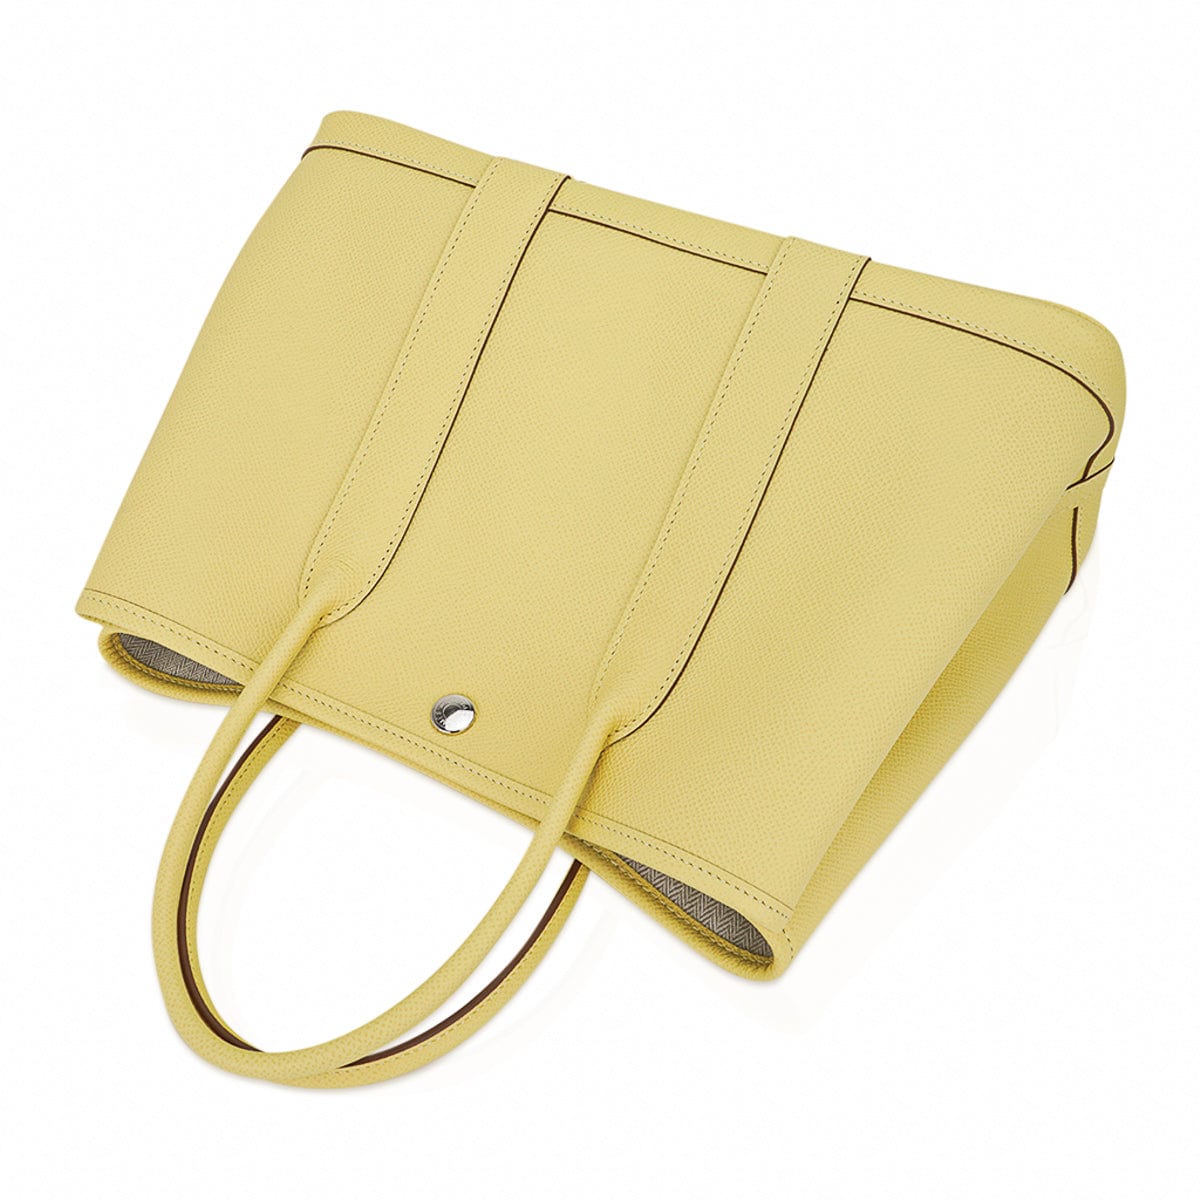 Bags, Hermes Garden Party 36 Negonda Gold Leather